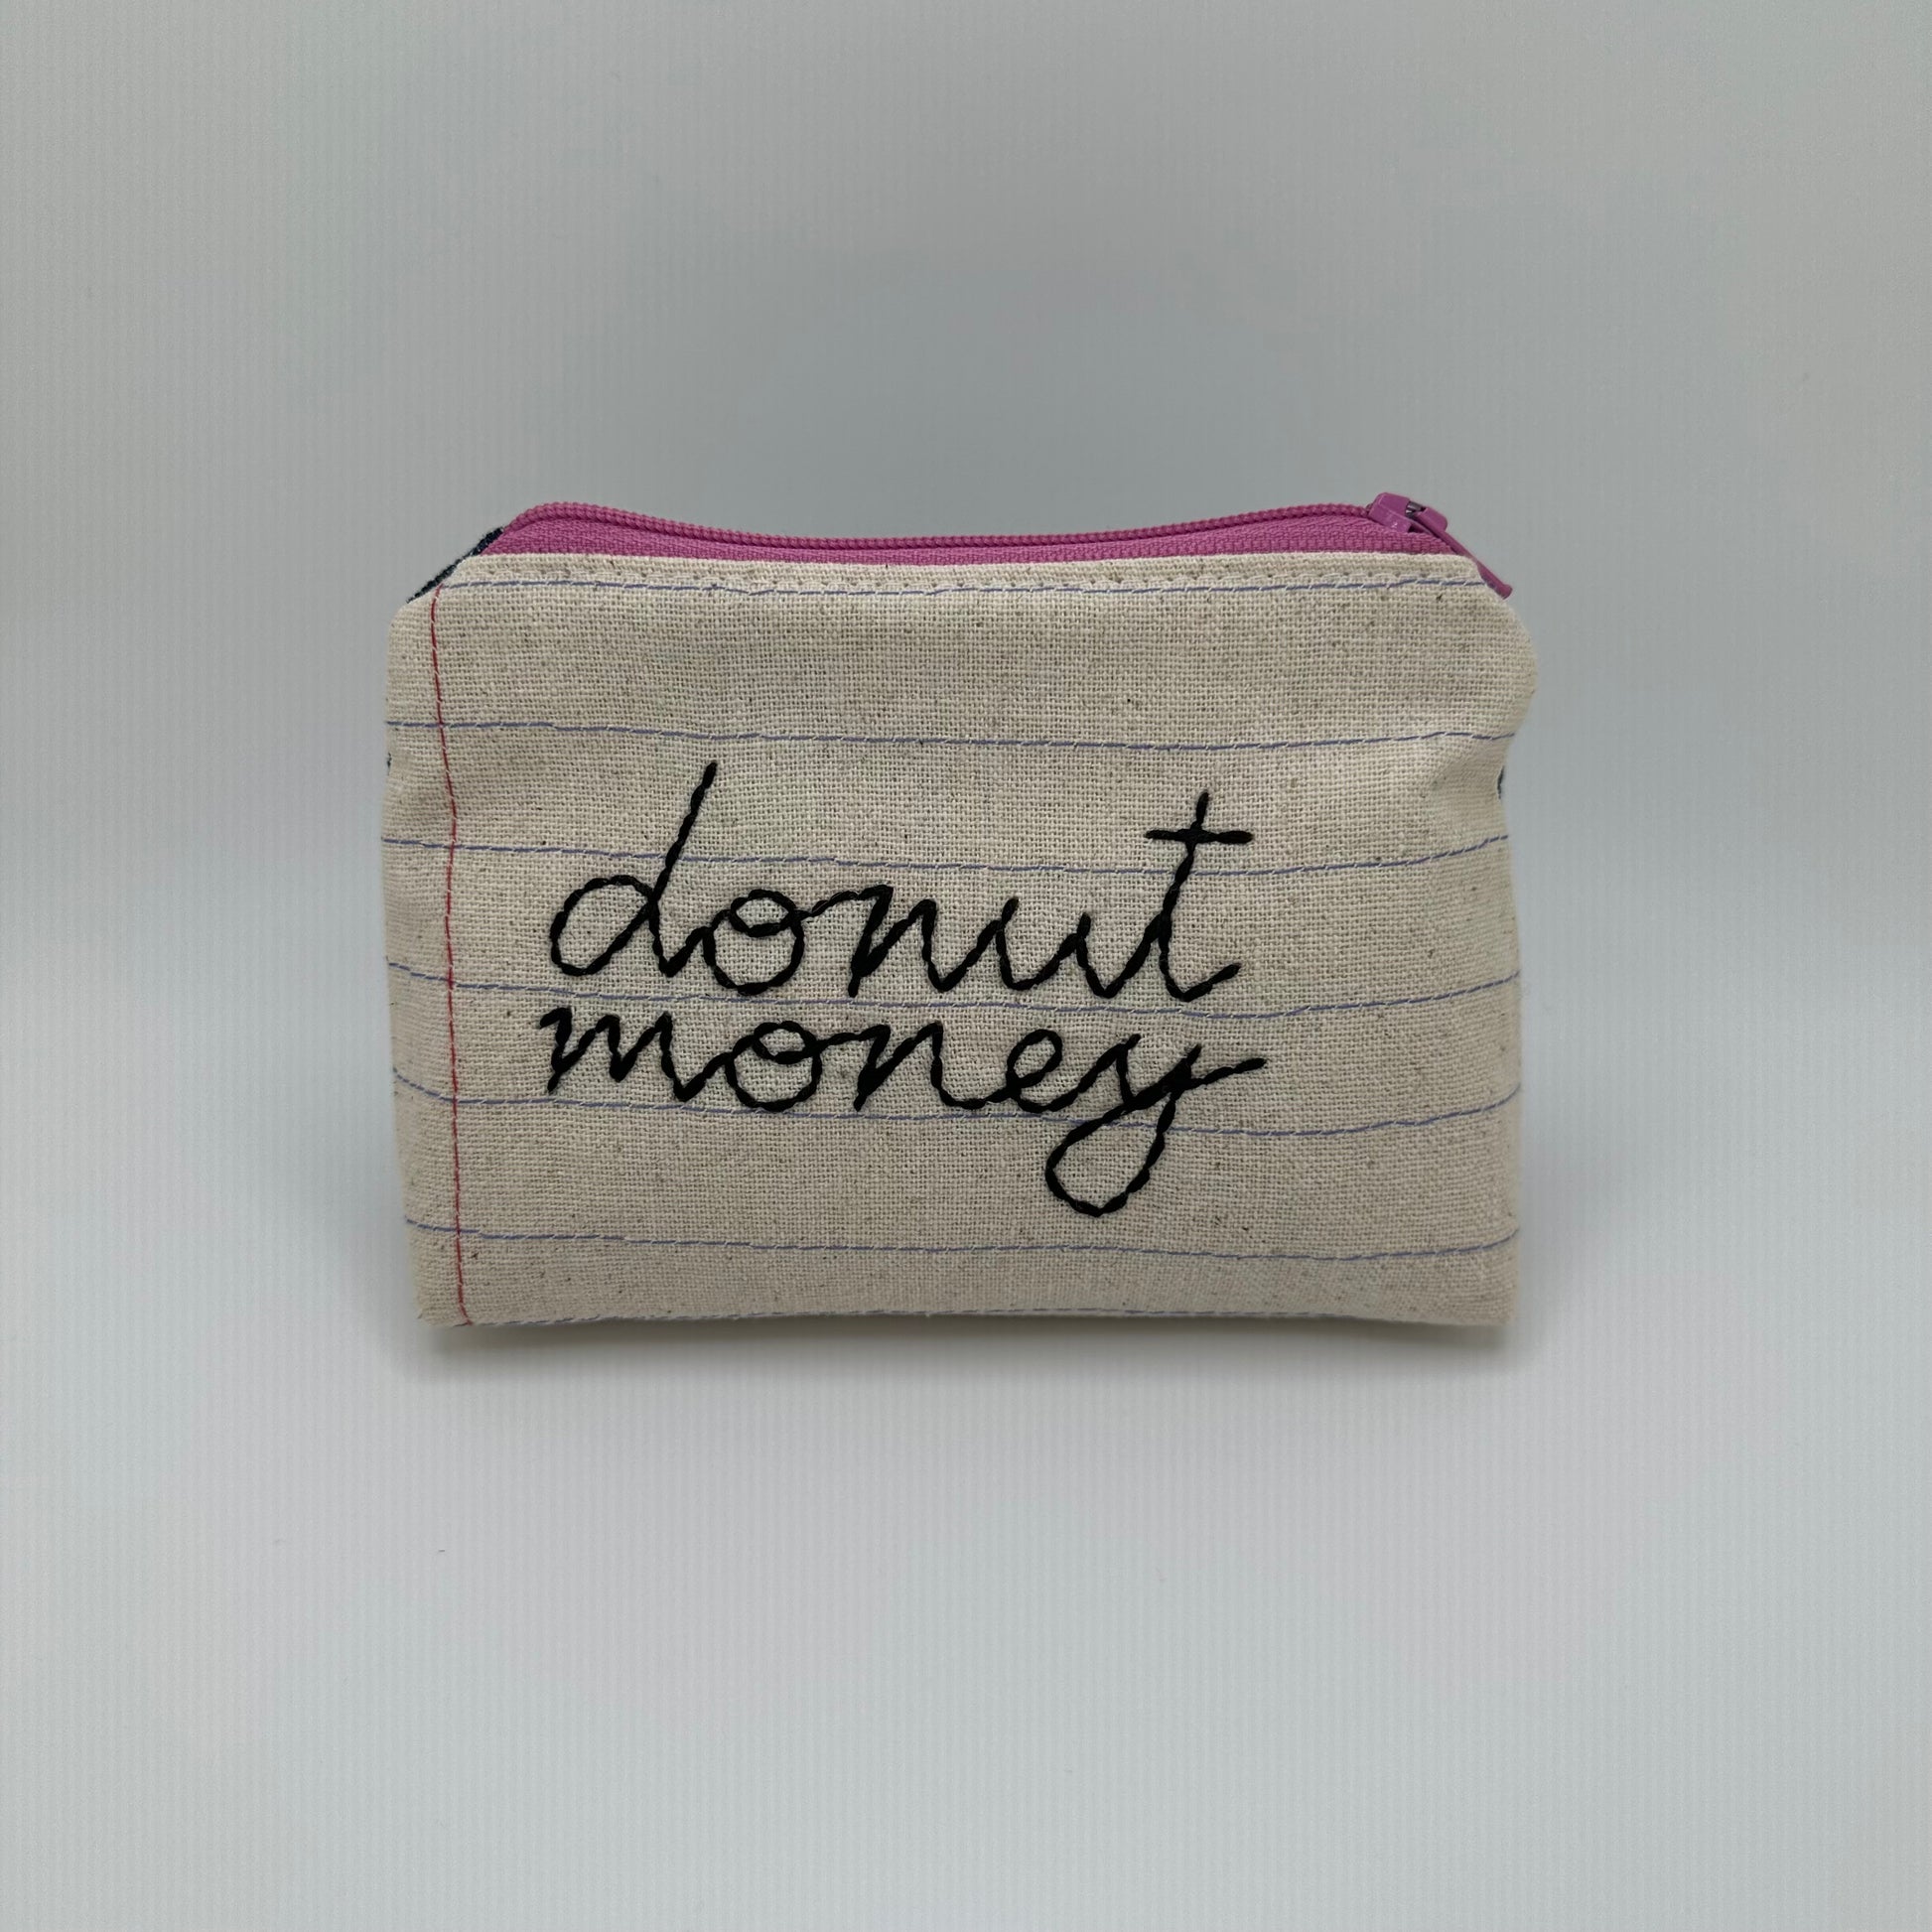 Handmade pouch sewn with the words "donut money"